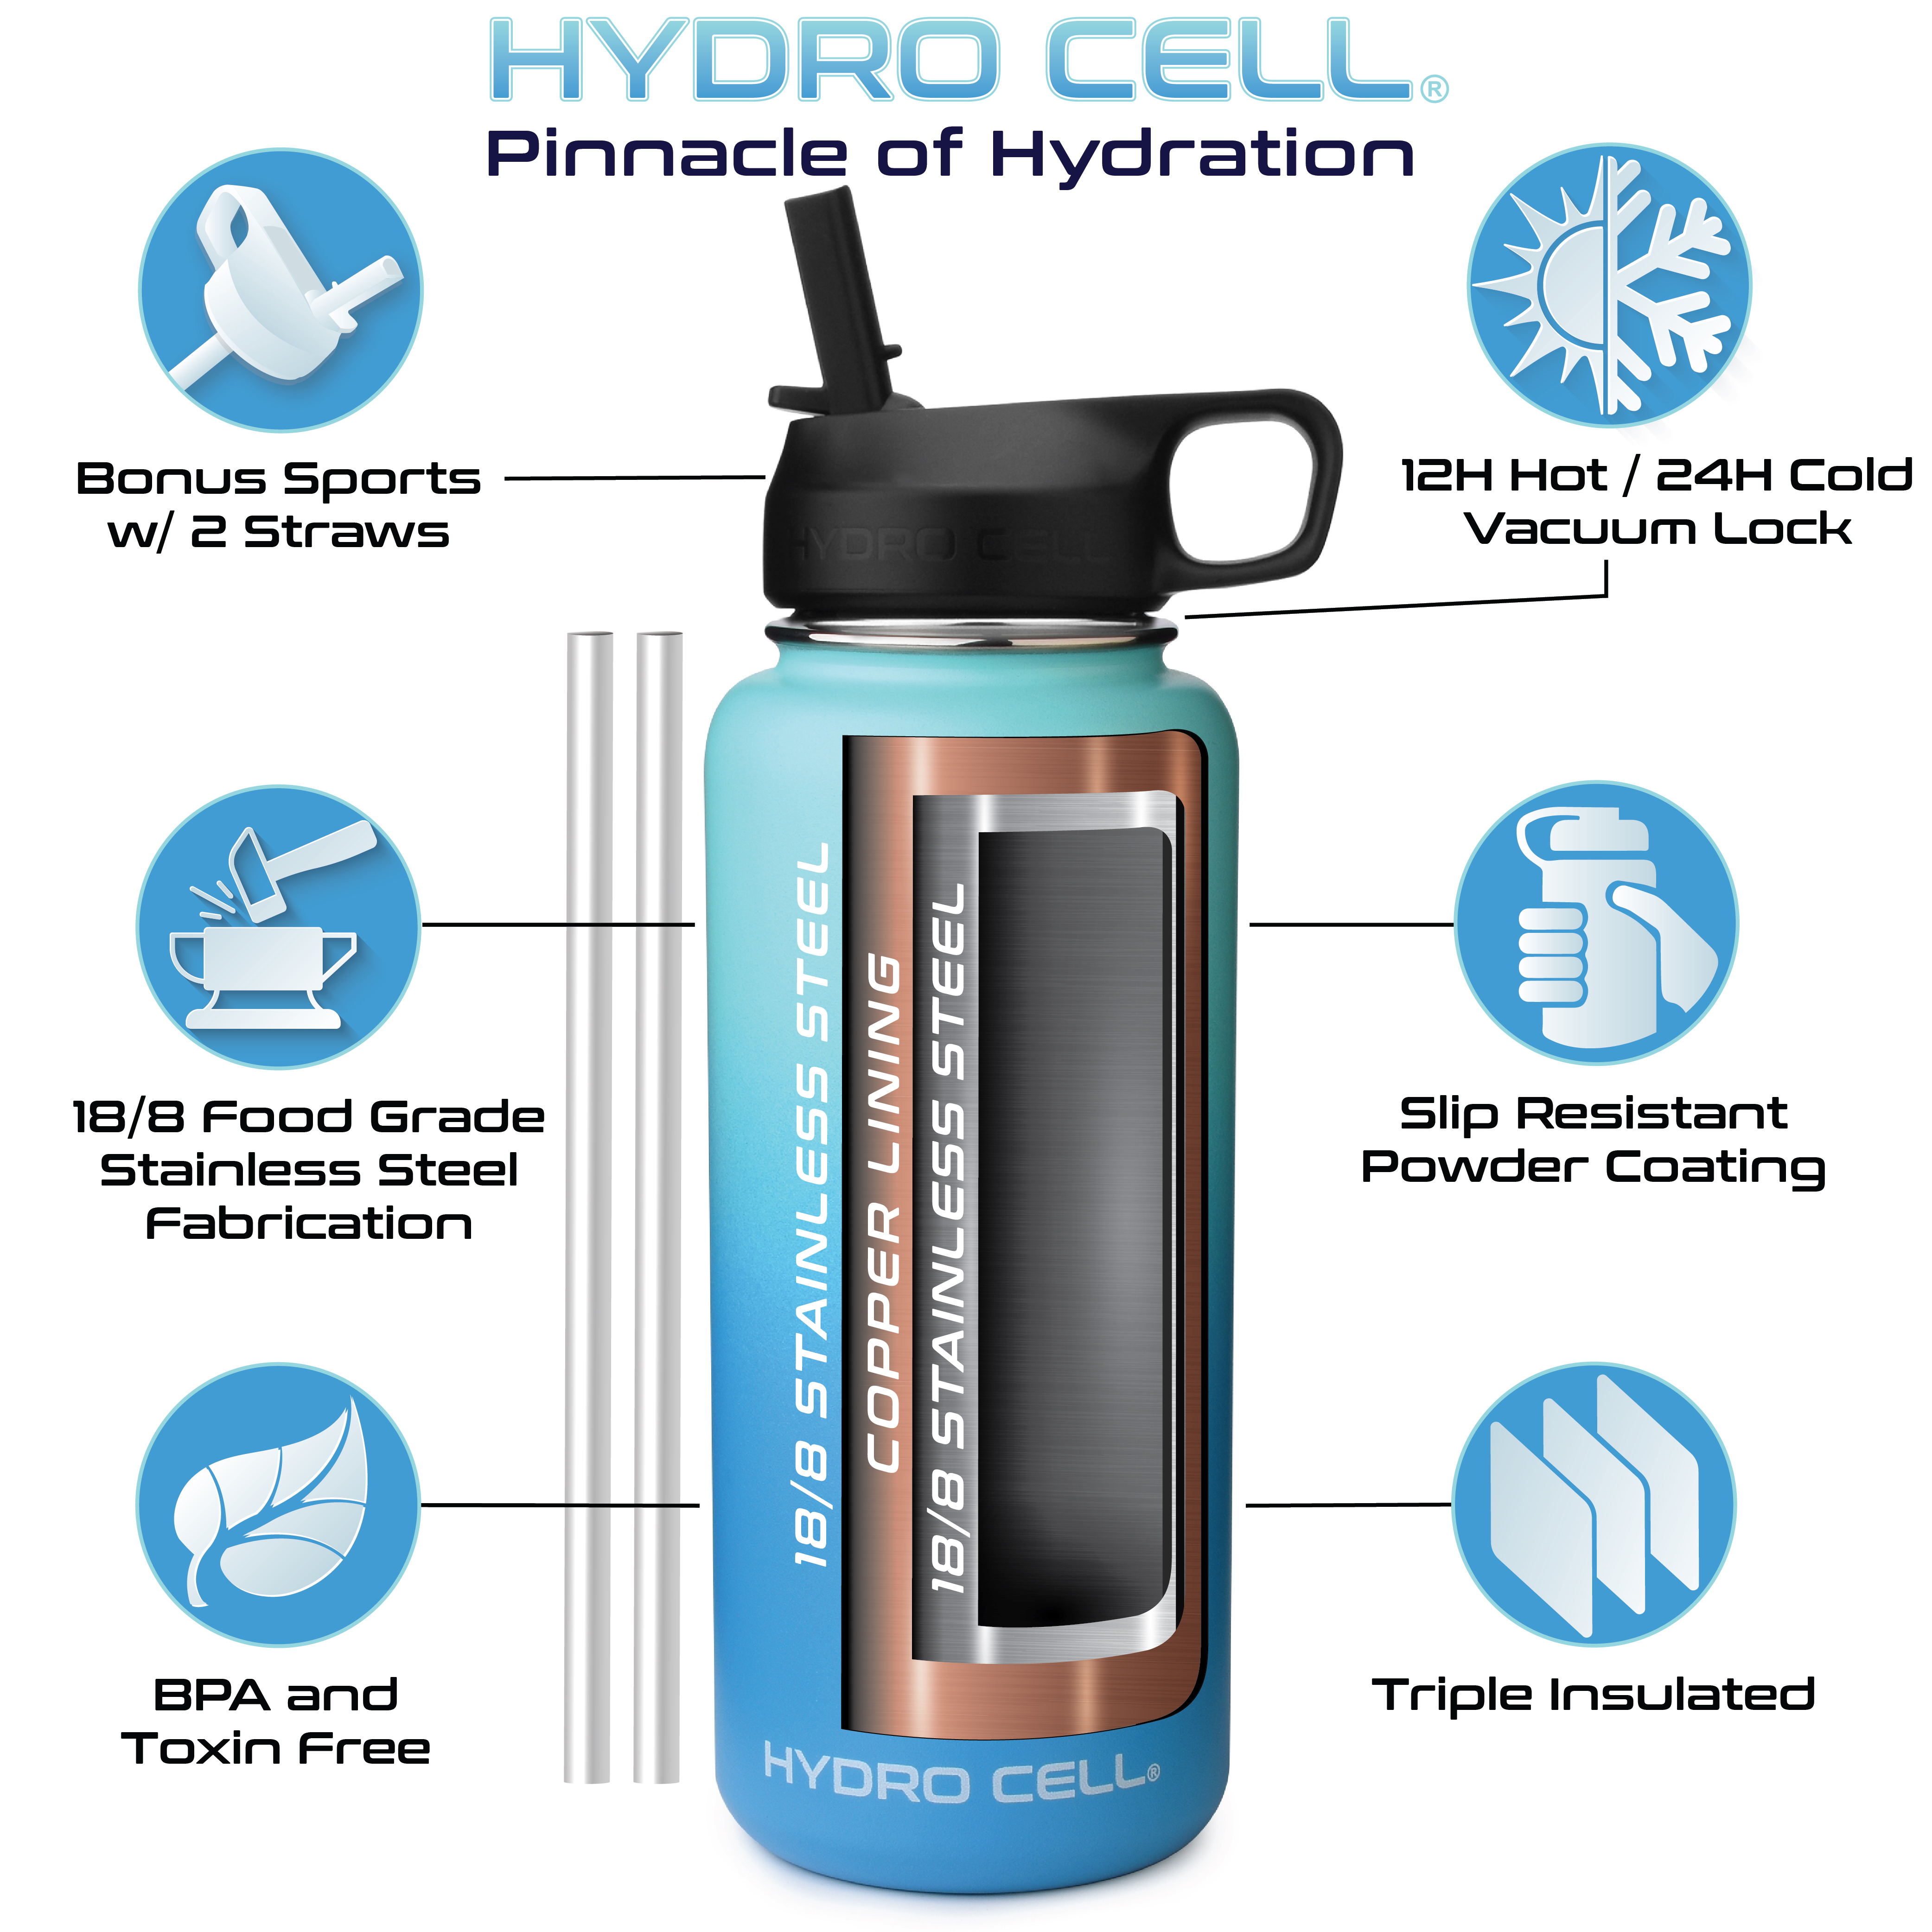 32oz (Fluid Ounces) Wide Mouth Hydro Cell Stainless Steel Water Bottle Teal/Blue - image 2 of 3